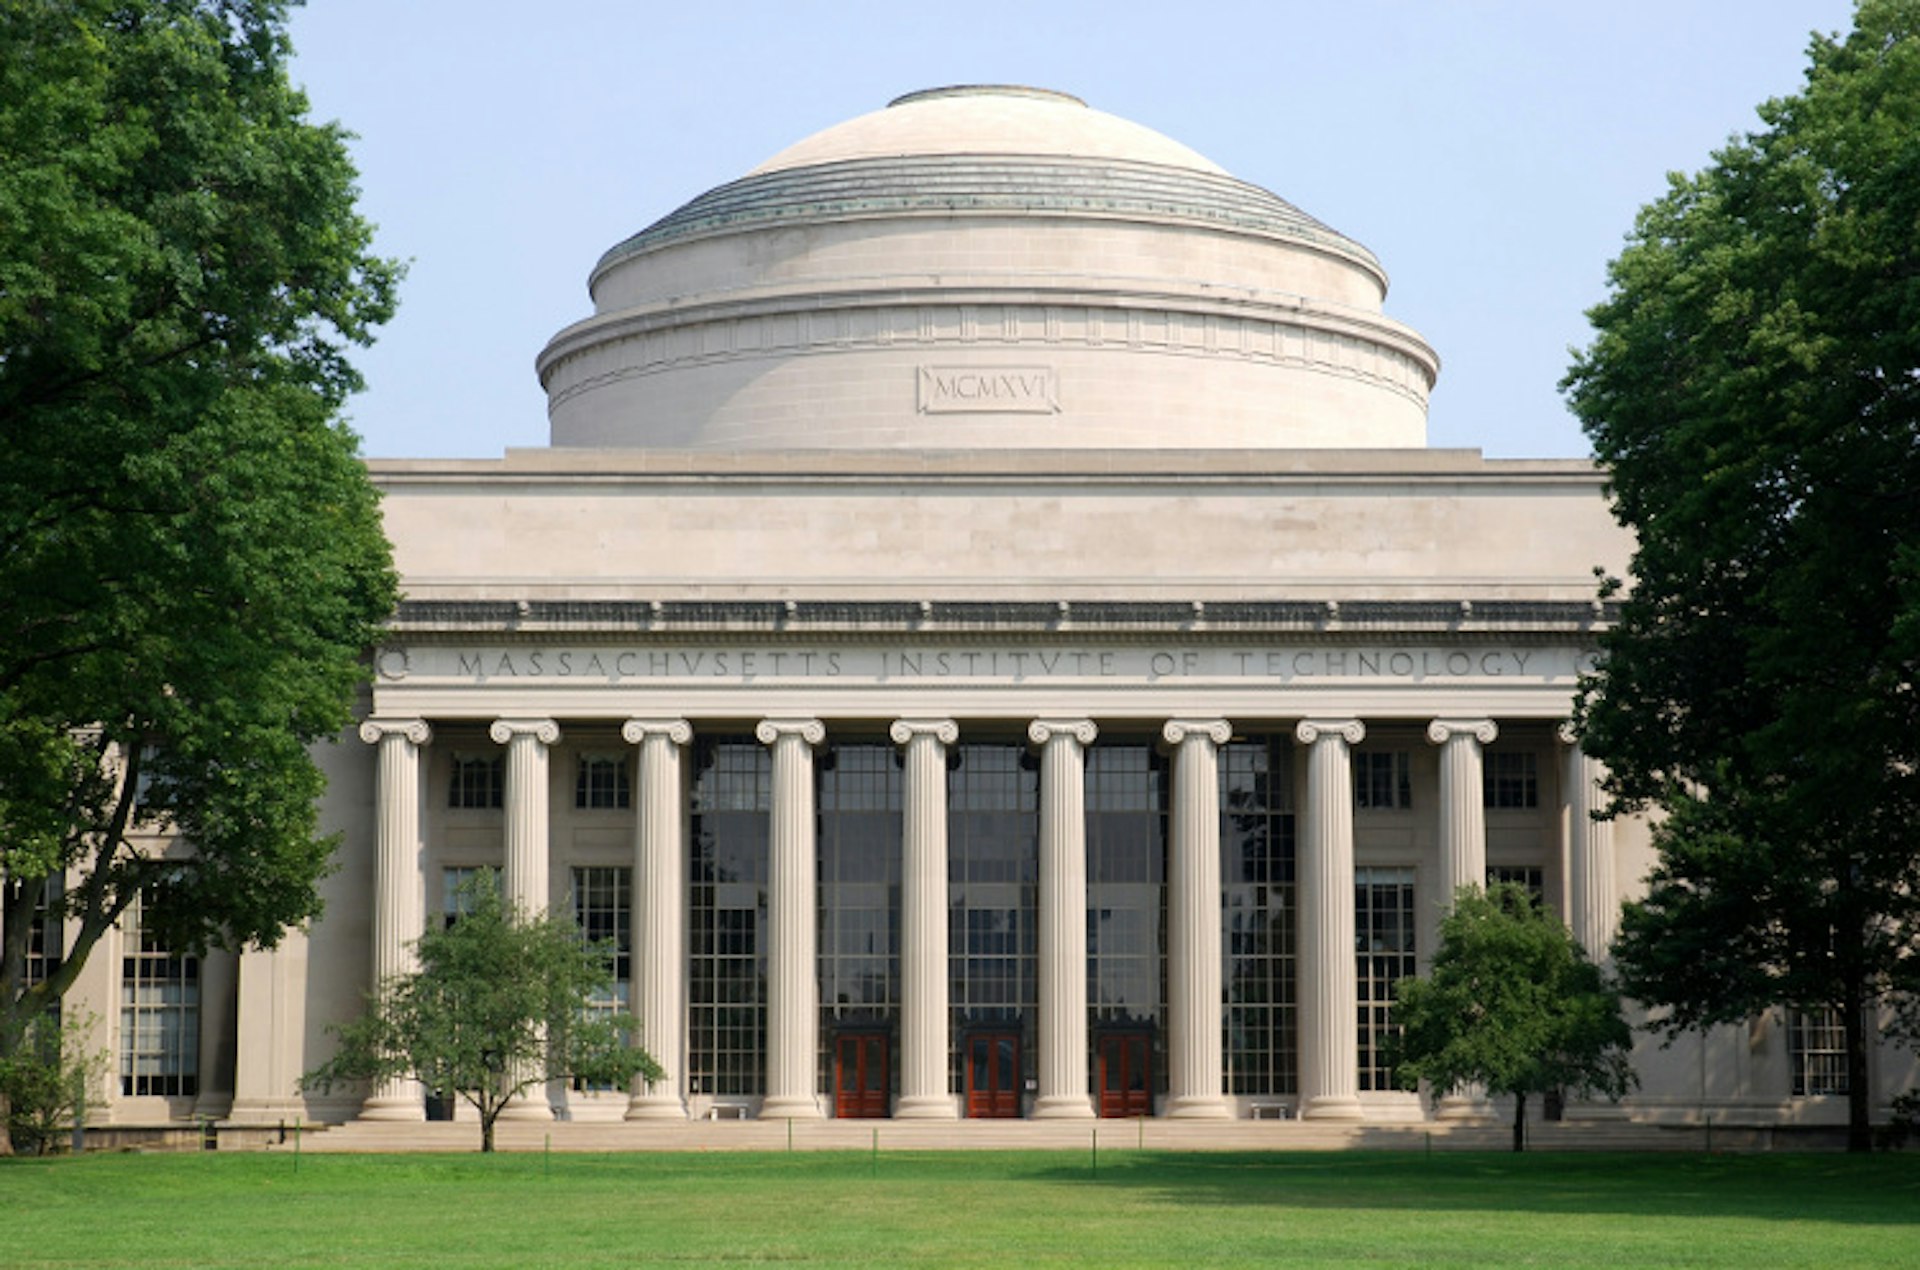 Great dome of the Massachusetts Institute of Technology Building 10. Image by Pete Spiro / Shutterstock.